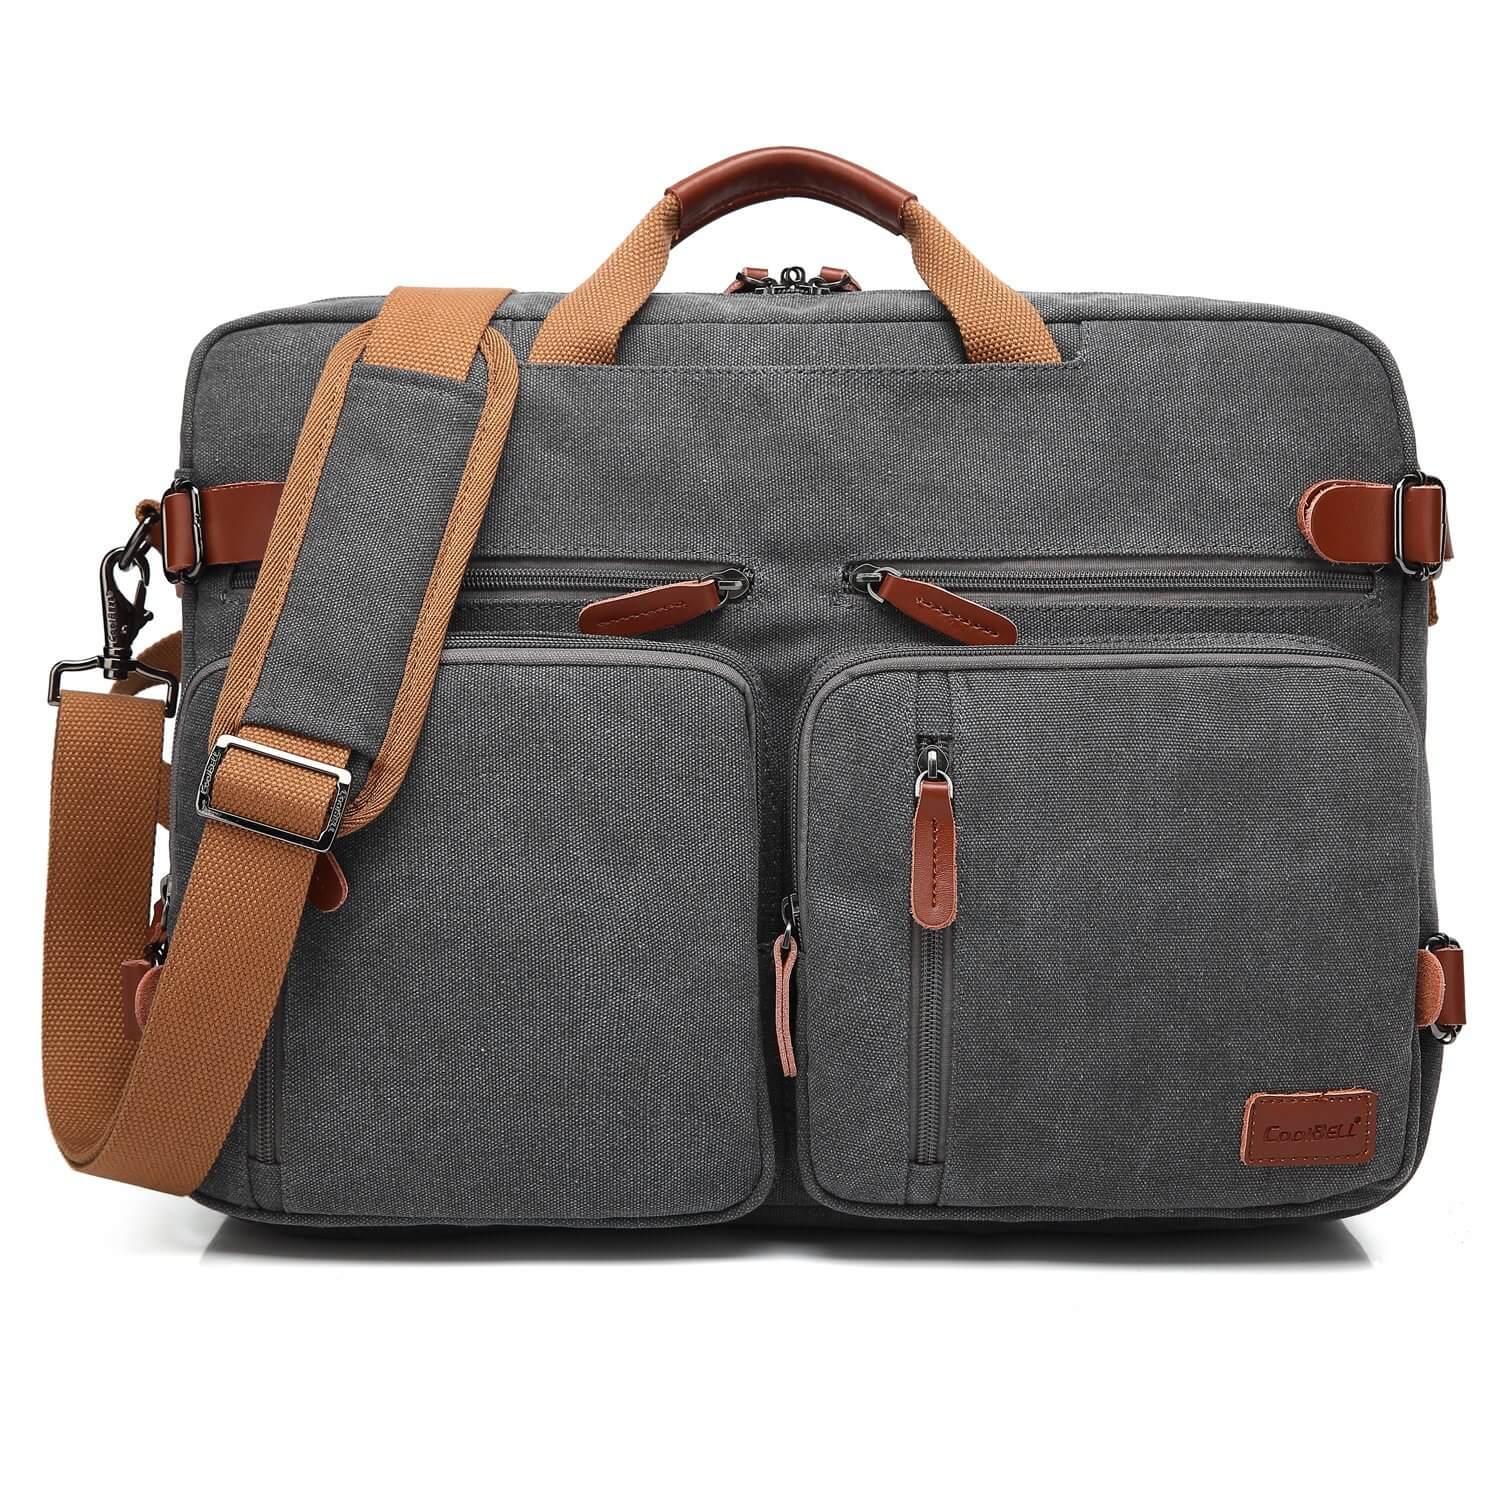 Best laptop bags to protect your laptop [2020 Guide]